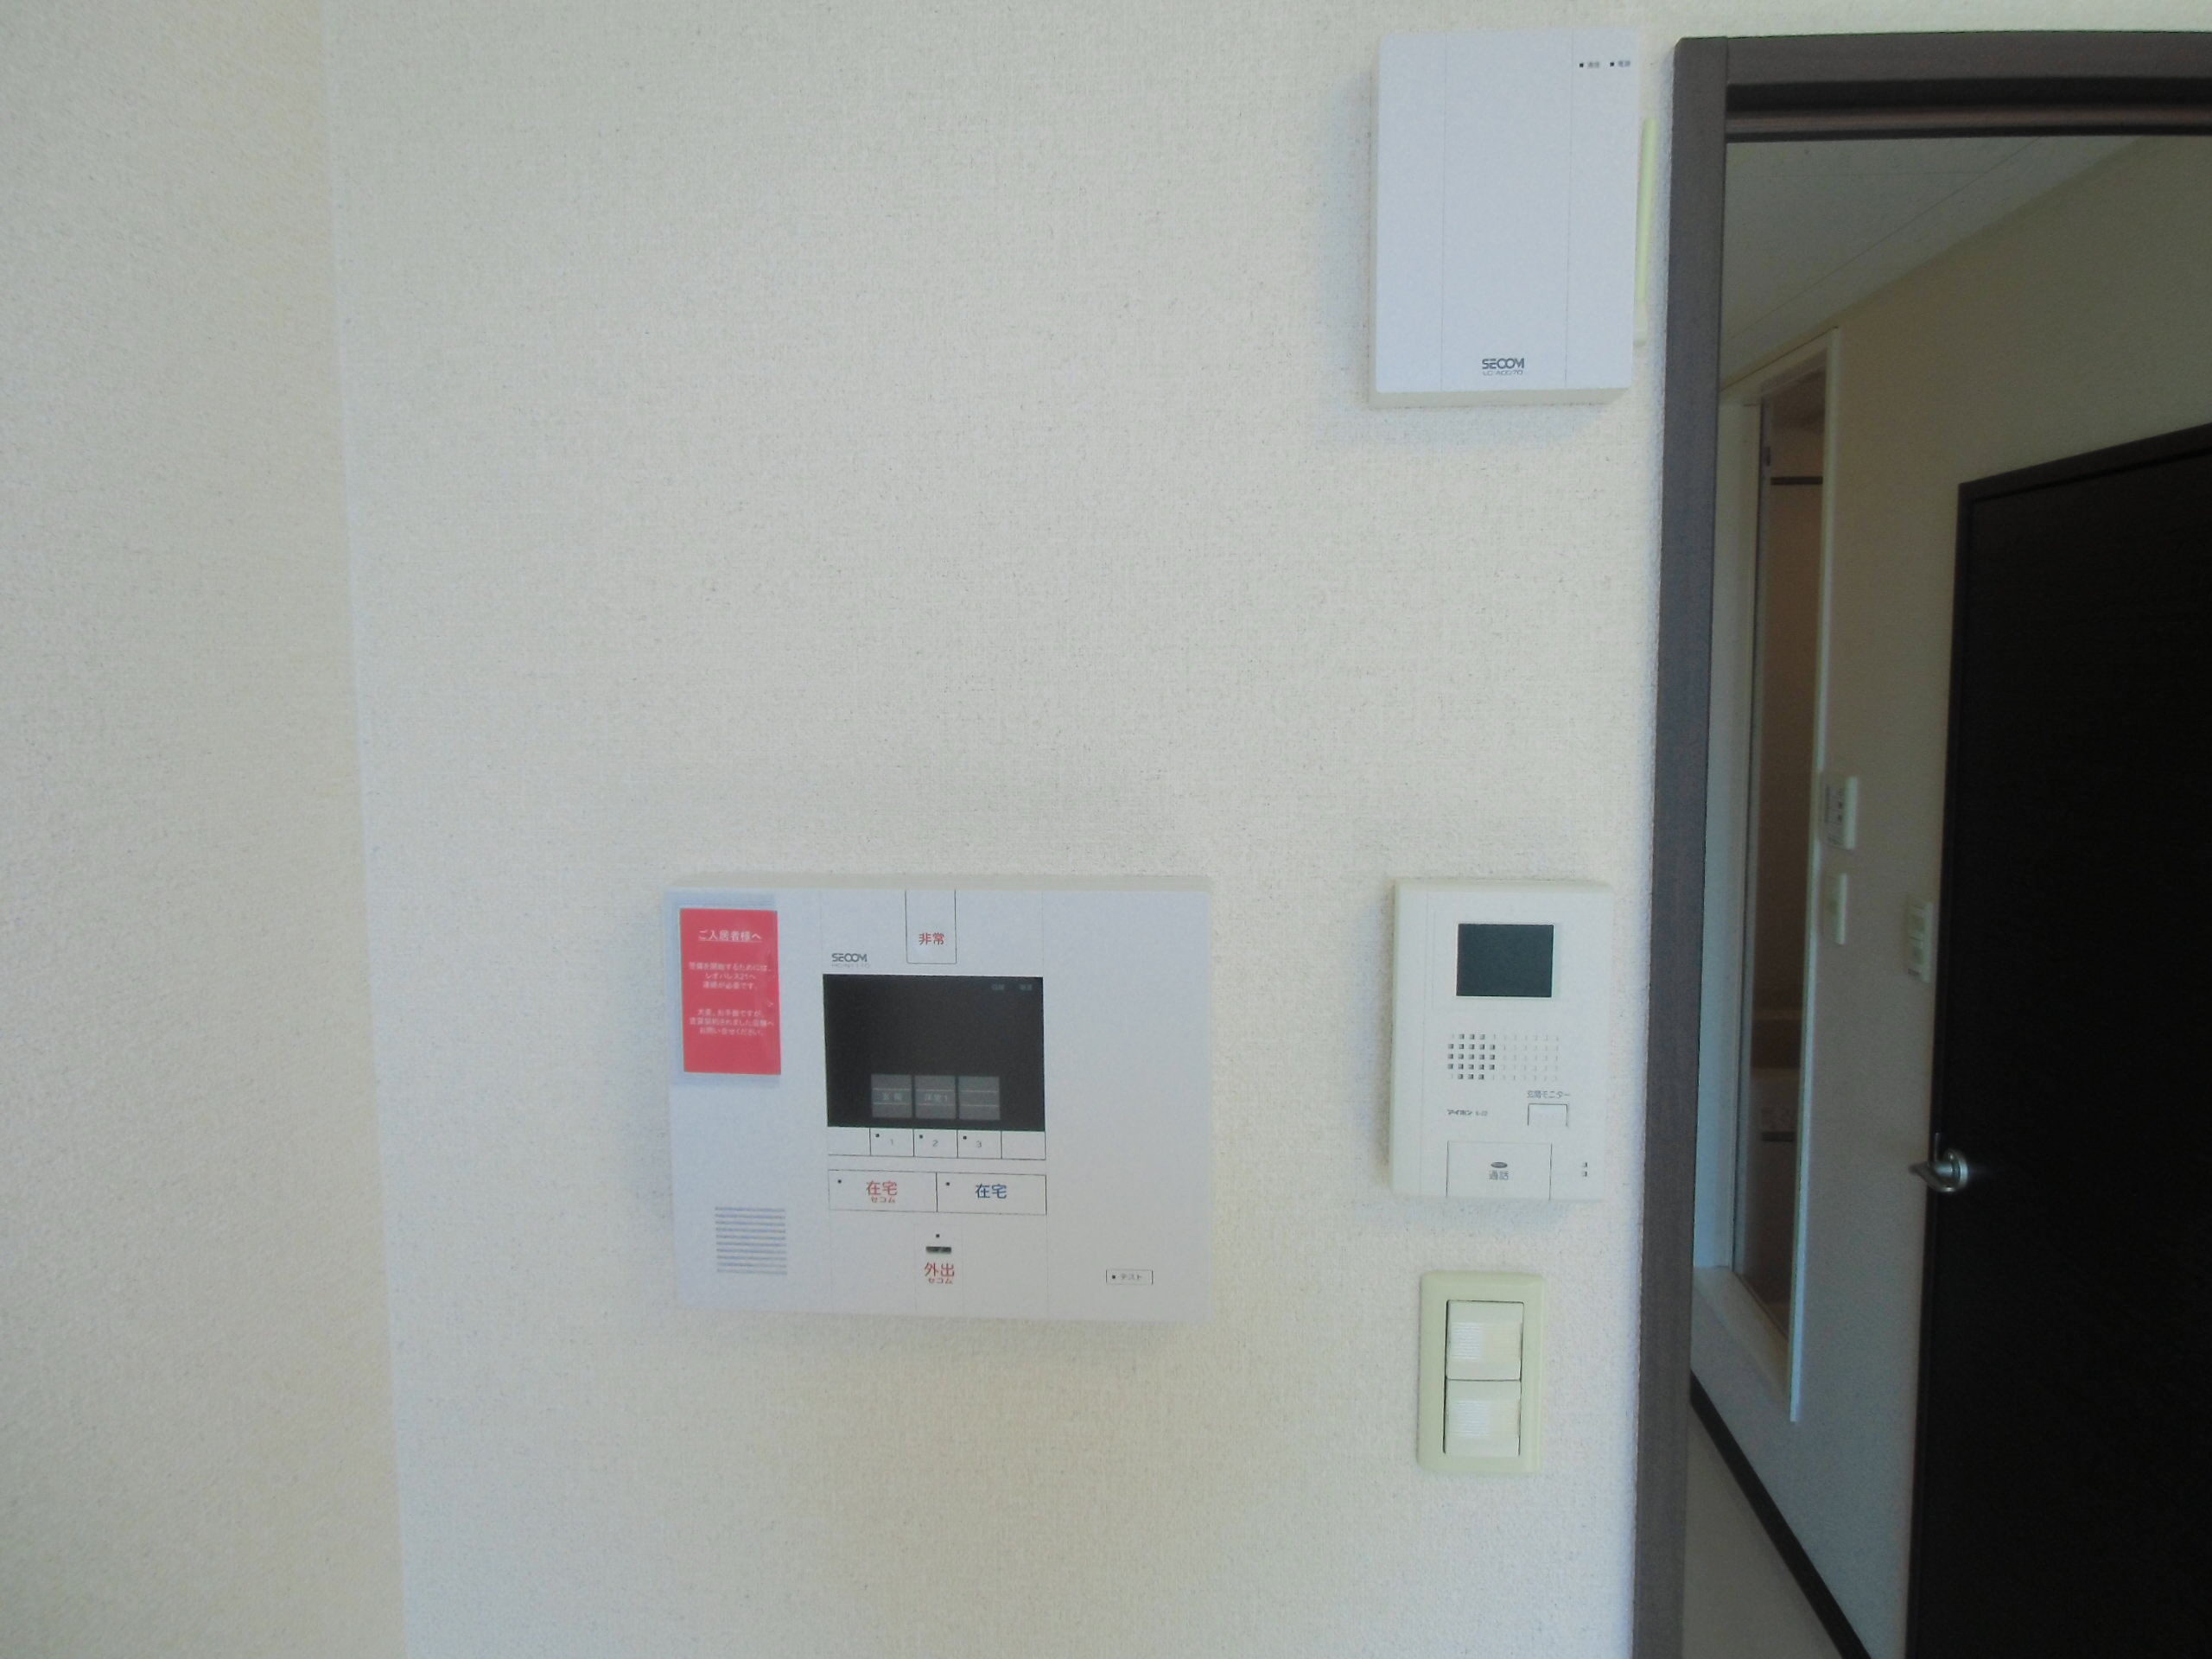 Other. Monitor with intercom, Security over tee system